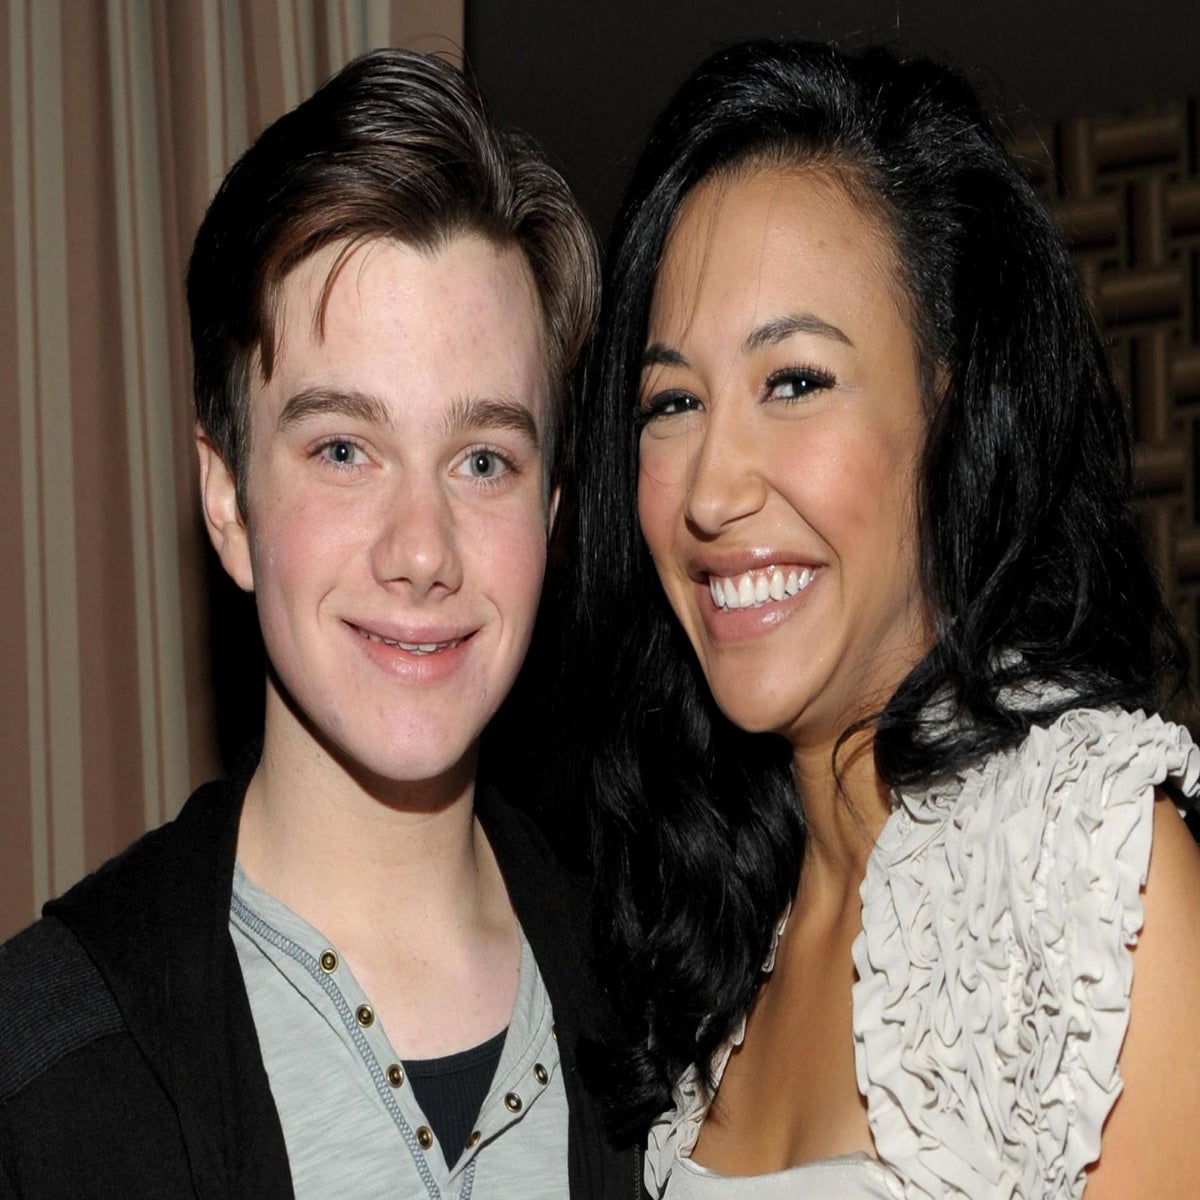 Naya Rivera Porn Sex - She made you feel protected': Glee's Chris Colfer writes moving tribute to  co-star Naya Rivera | The Independent | The Independent